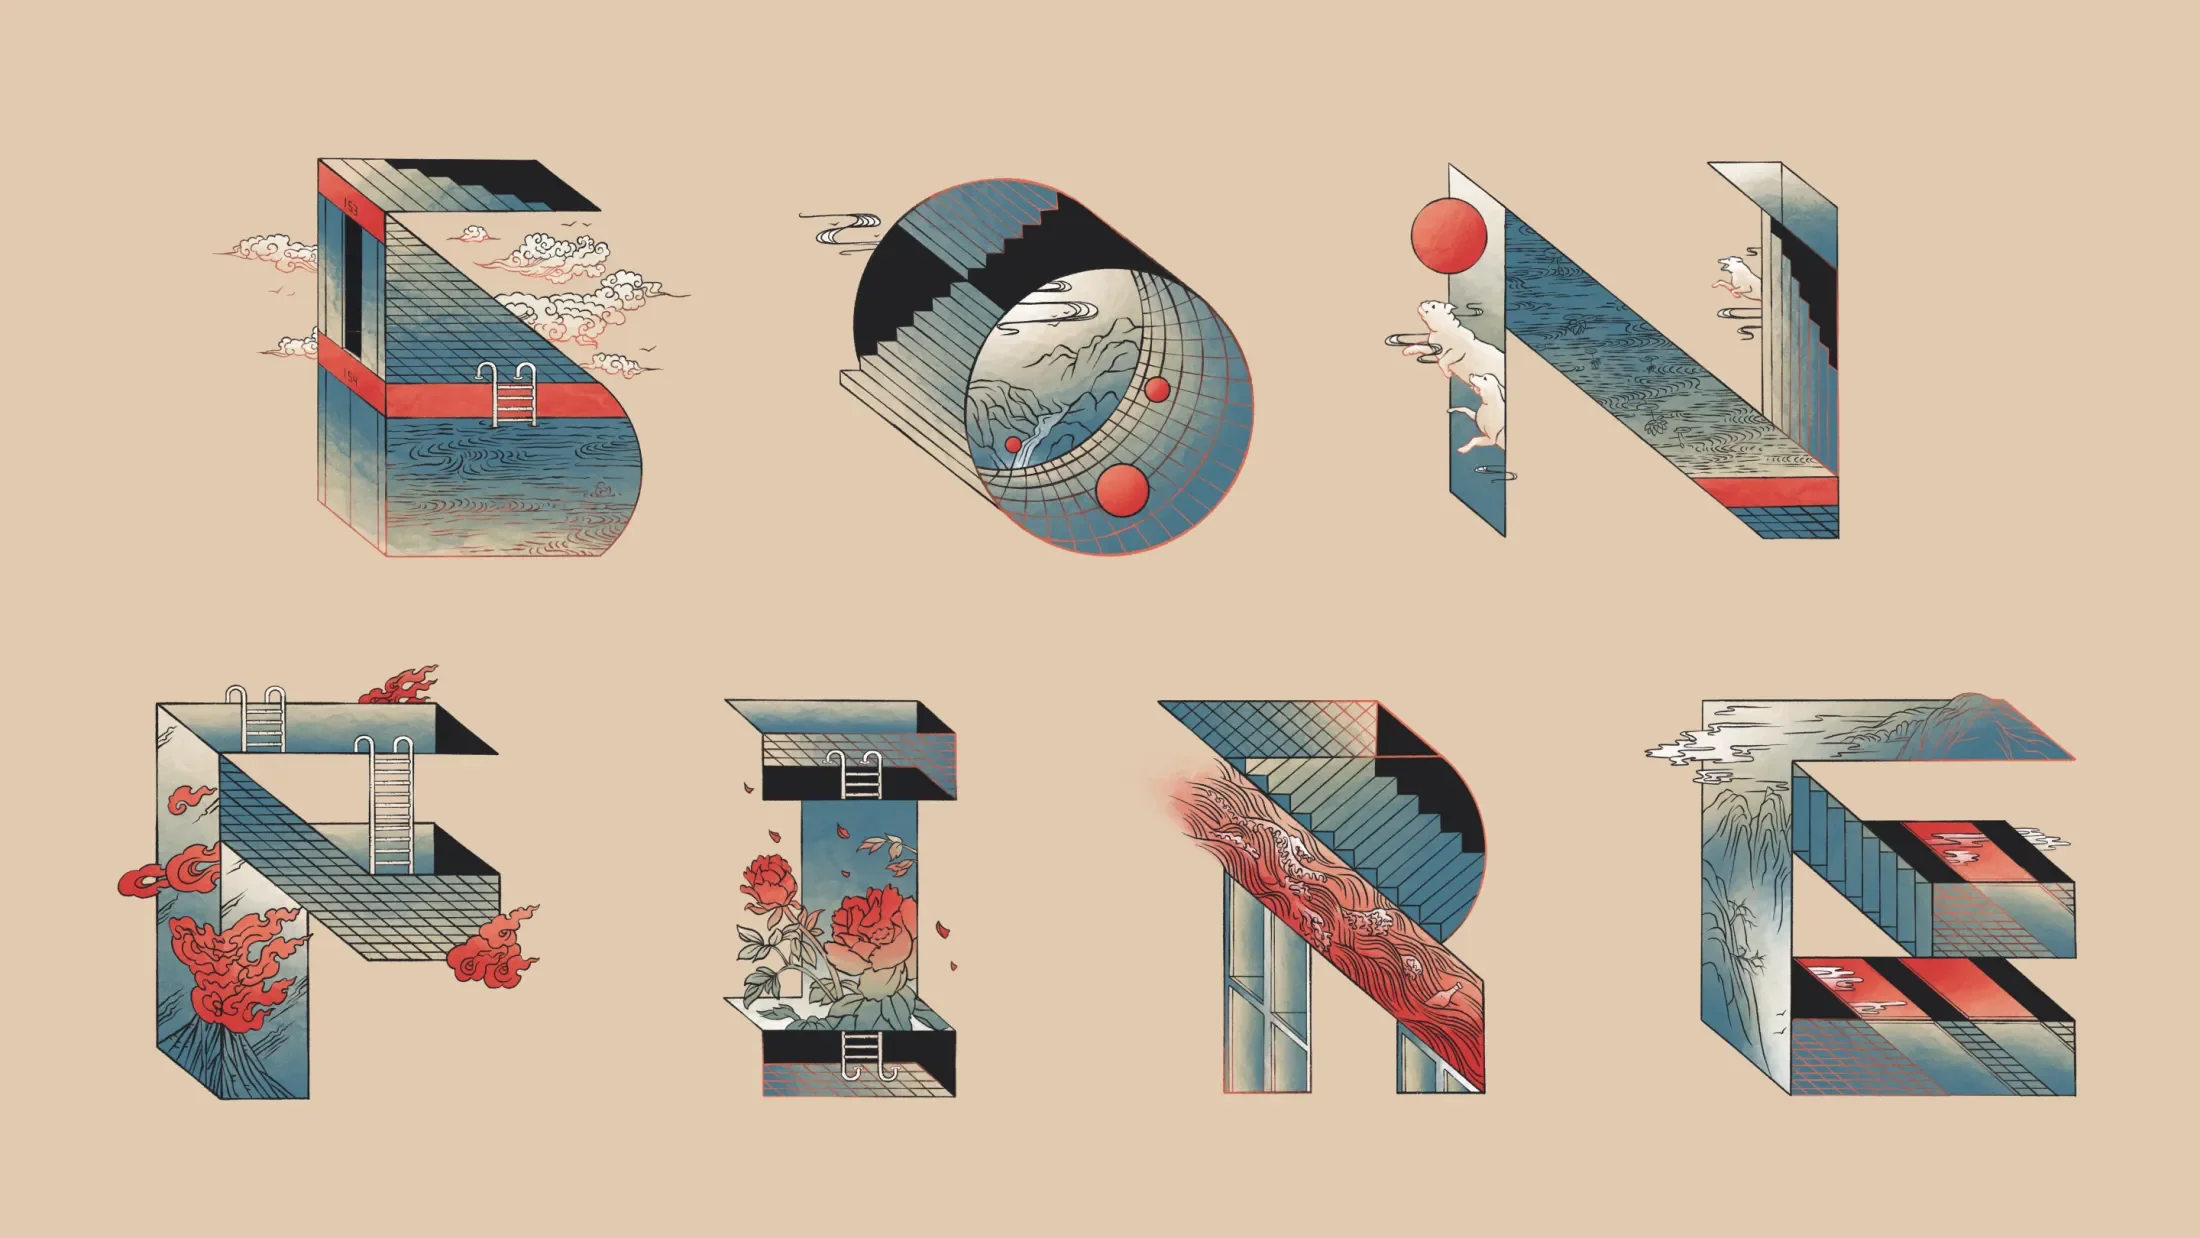 A series of letters comprised of pools, staircases, dogs, clouds and suns influenced traditional Chinese drawings spelling out "bonfire"